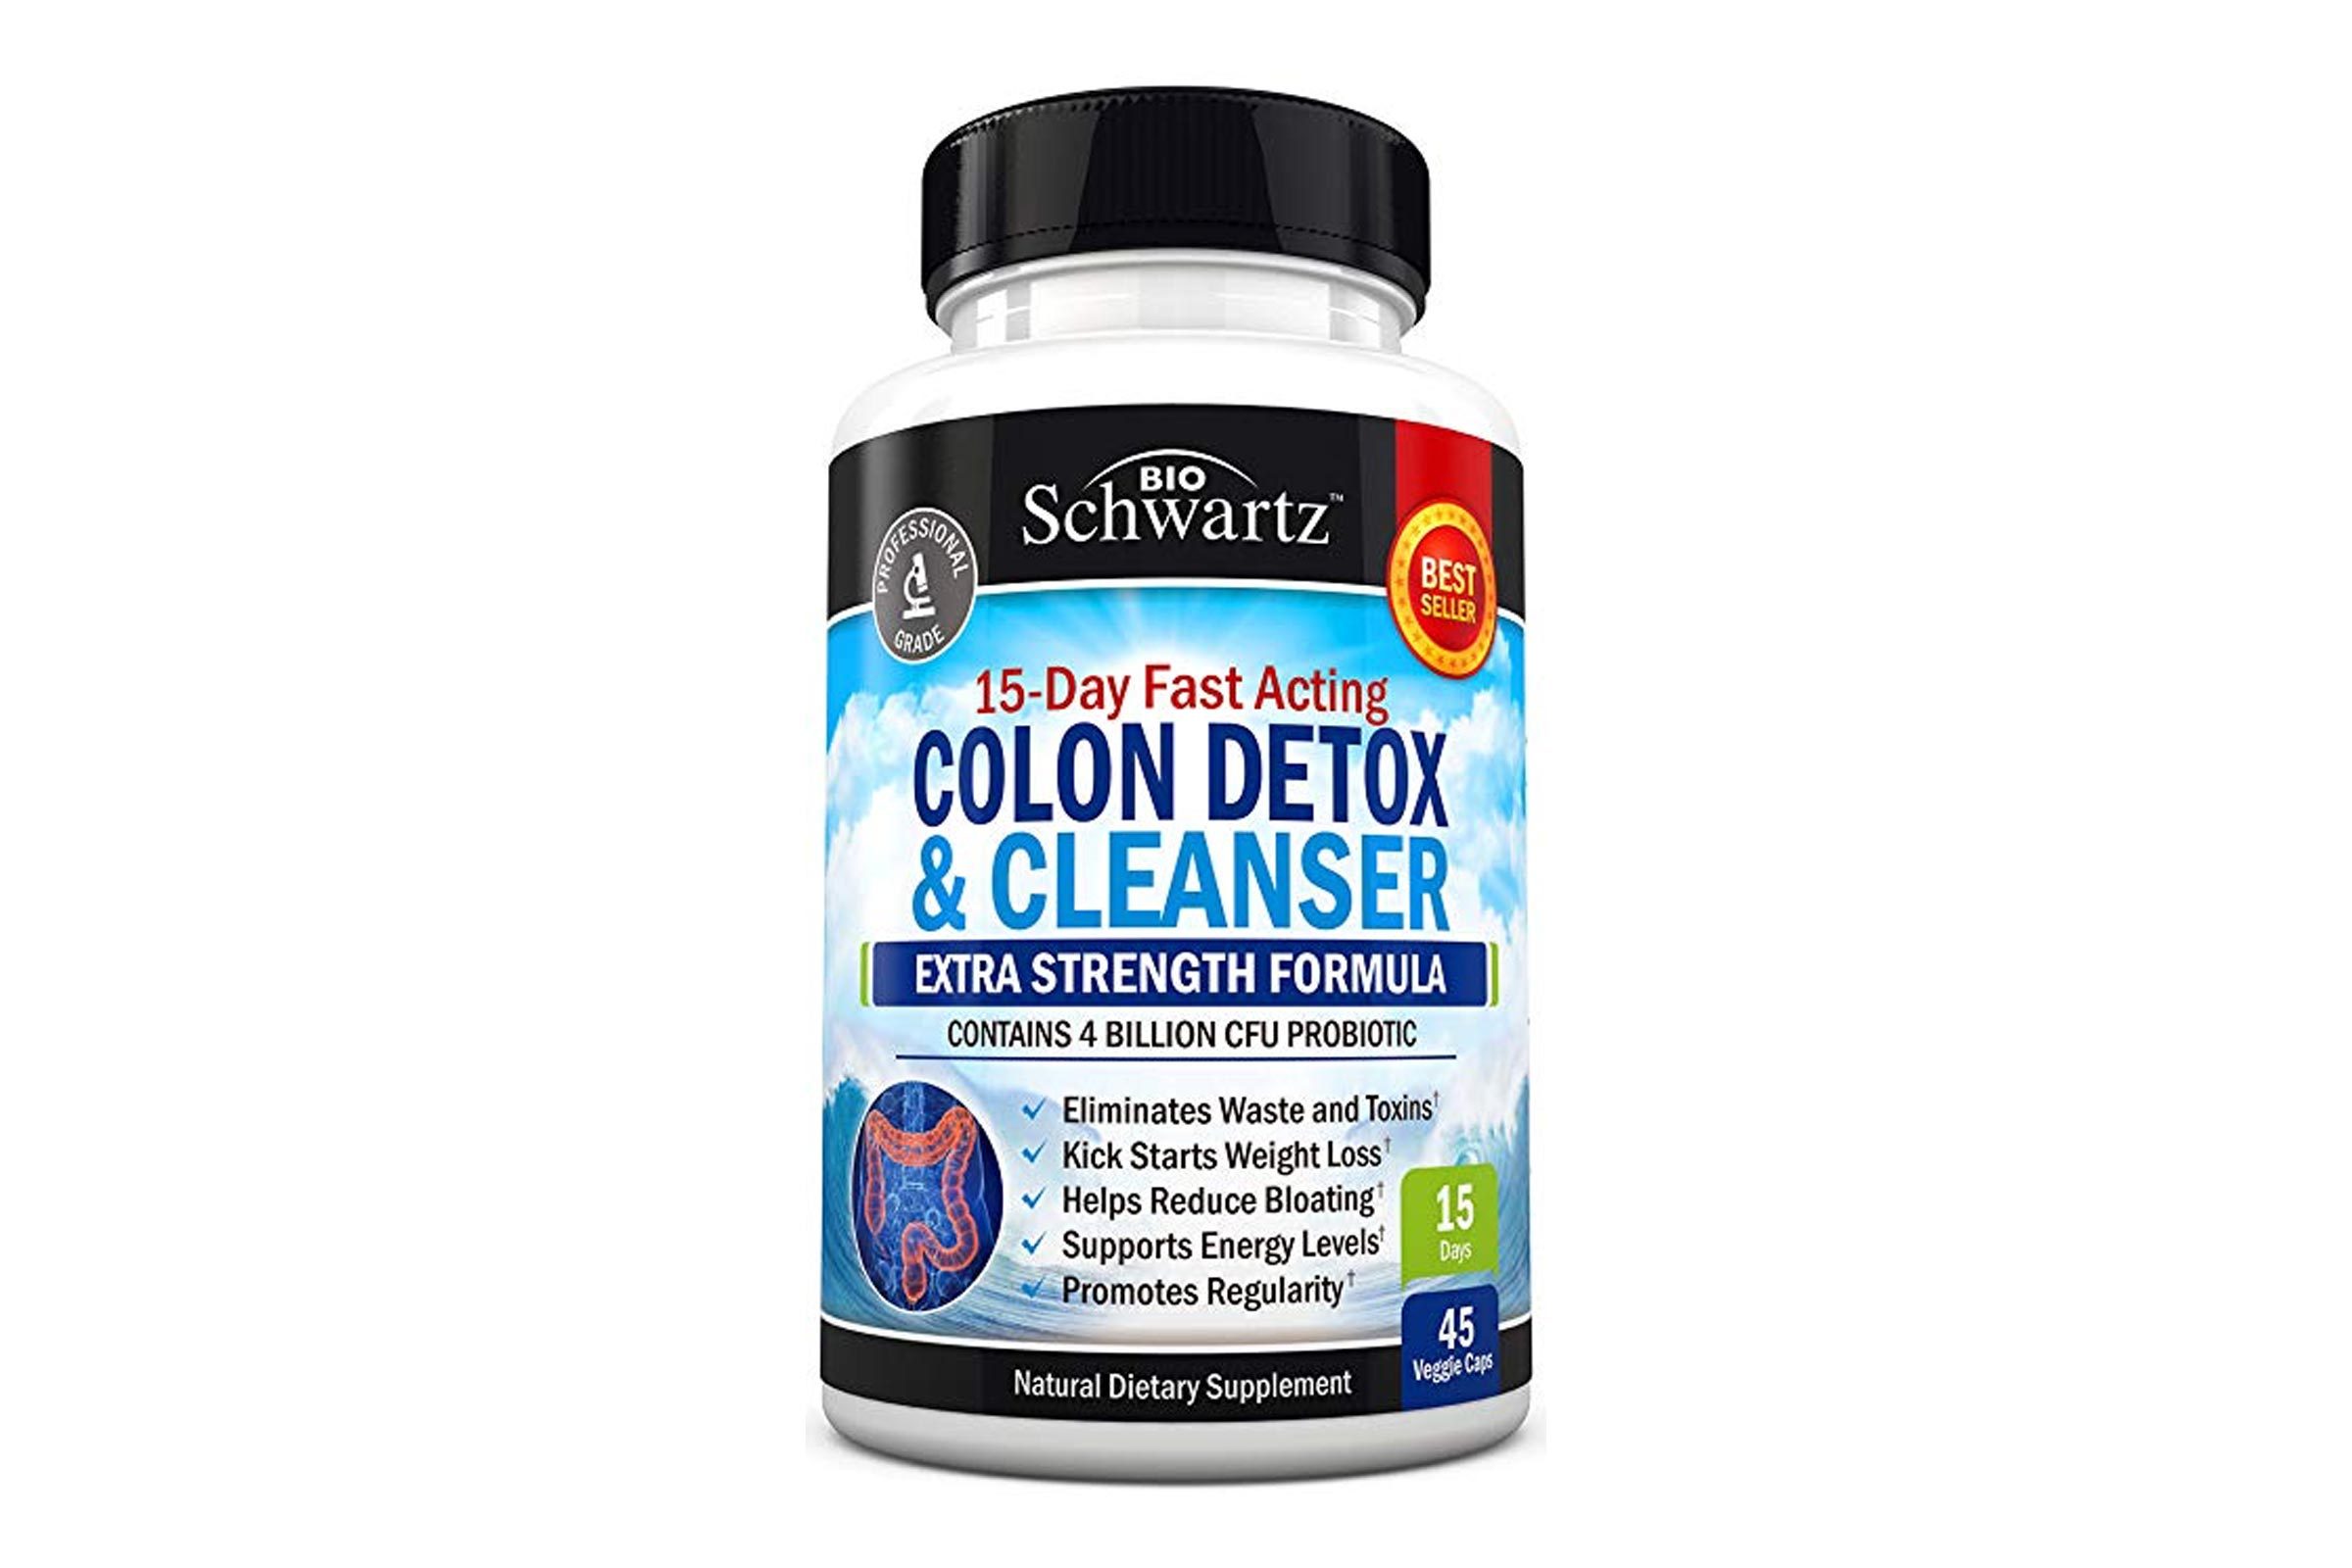 Colon Cleanser & Detox for Weight Loss. 15 Day Extra Strength Detox Cleanse with Probiotic for Constipation Relief. Pure Colon Detox Pills for Men & Women. Flush Toxins, Boost Energy. Safe & Effective 